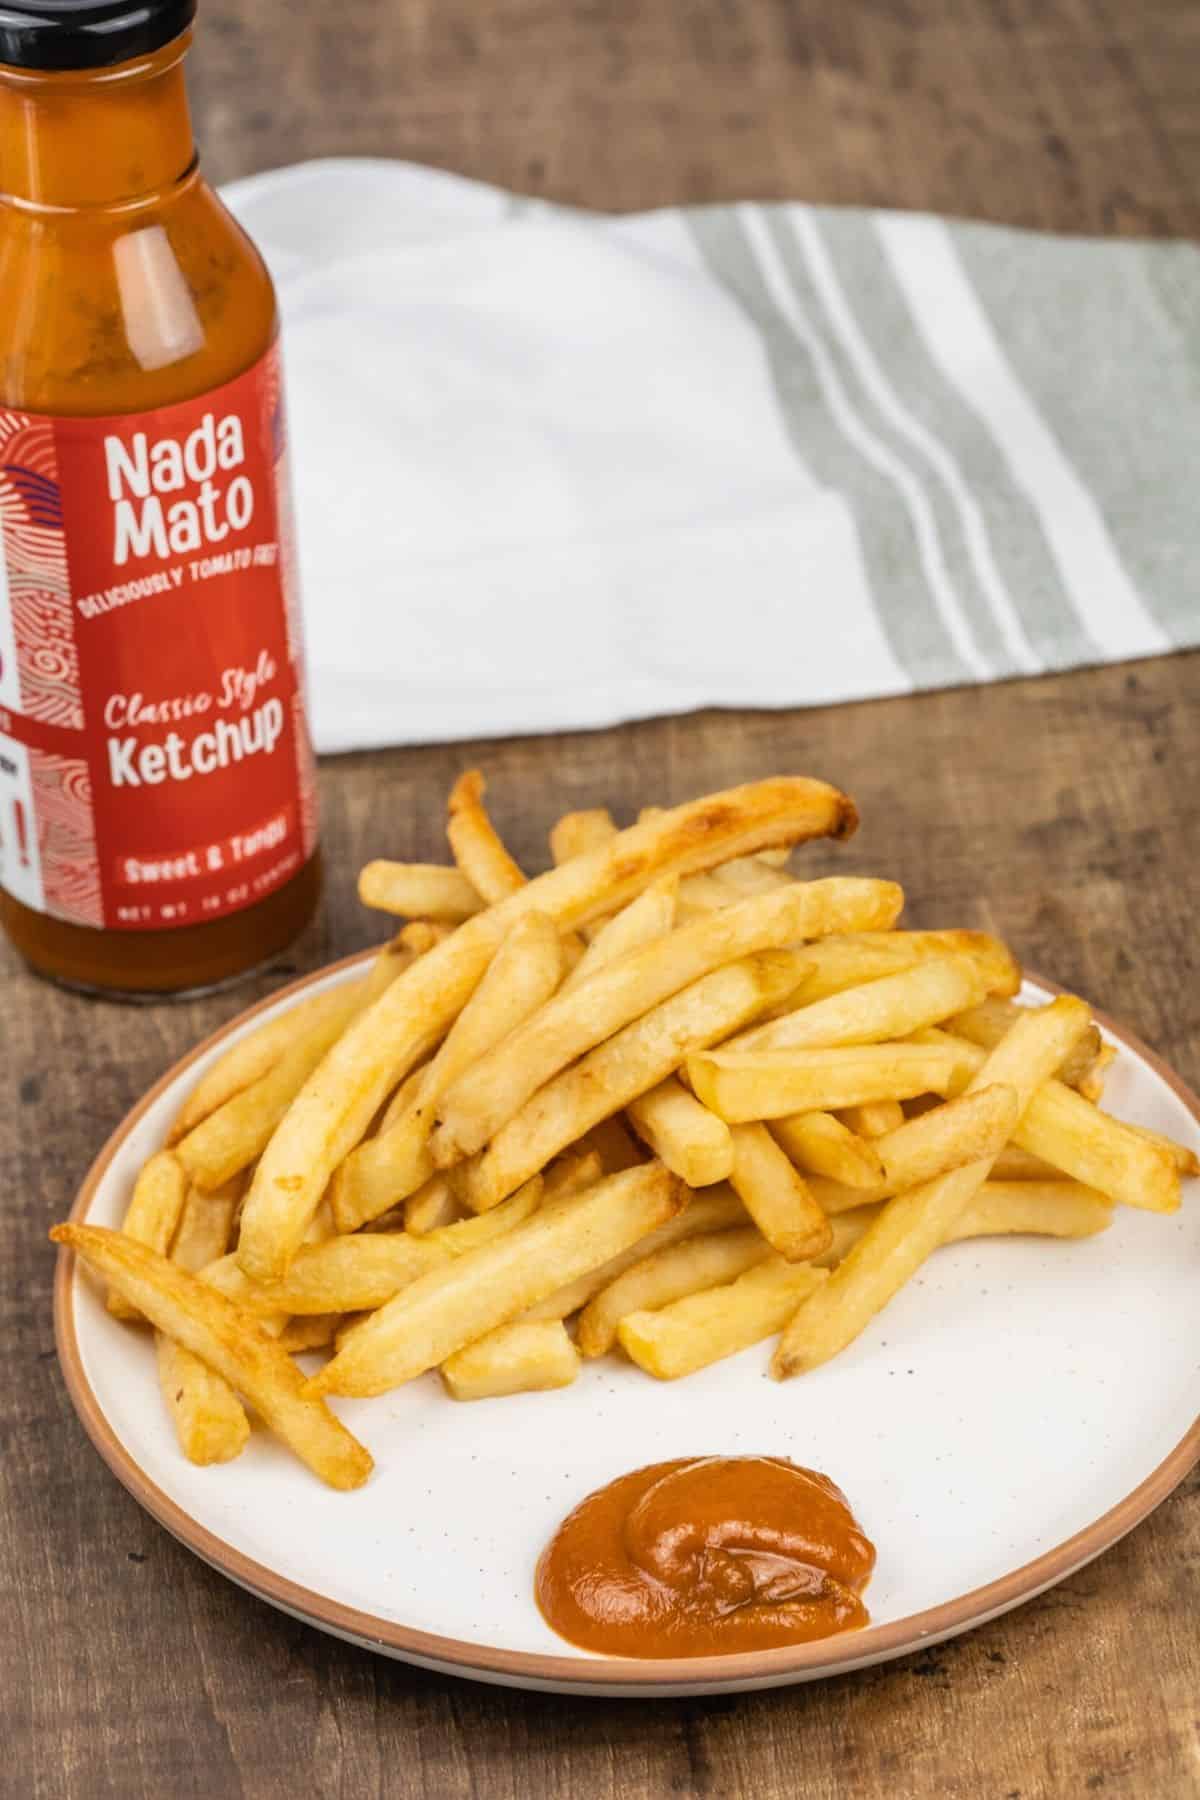 A small beige plate with French fries and a big dollop of Nada Mato ketchup on the plate. The bottle is behind the plate. A green and white towel is blurred in the background.